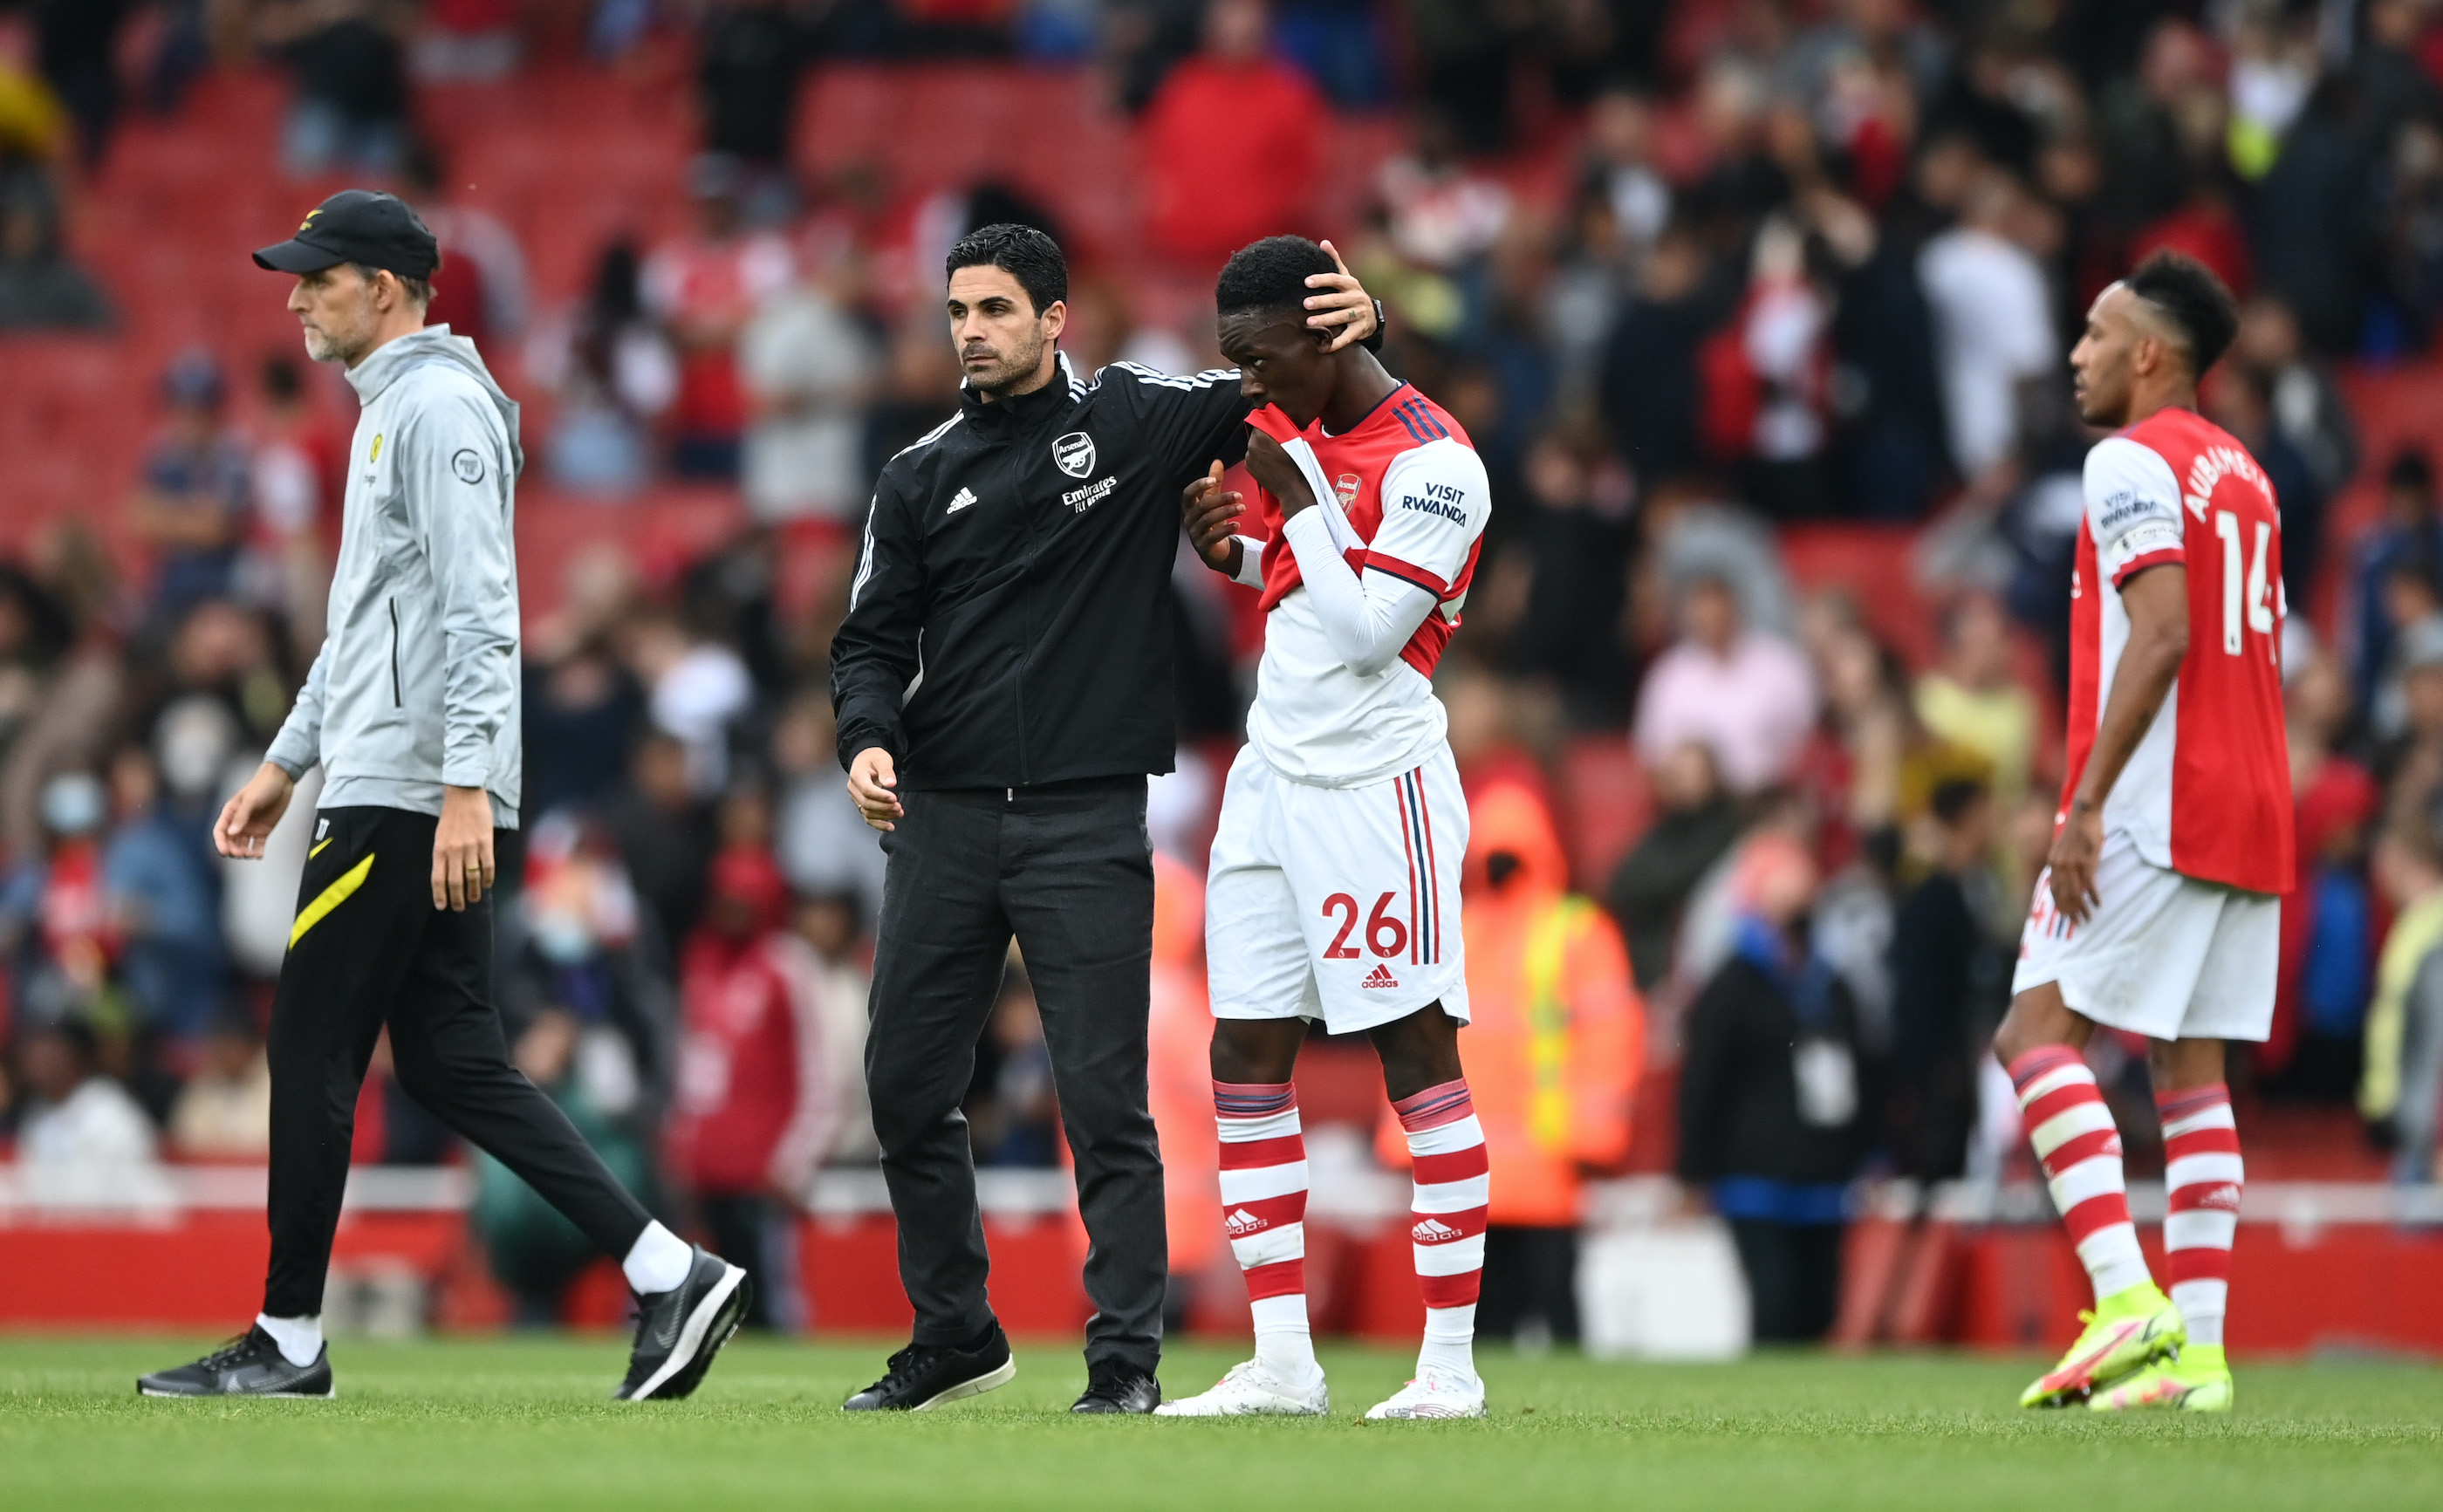 Folarin Balogun of Arsenal looks dejected as he is consoled by Mikel Arteta, Manager of Arsenal following defeat in the Premier League match between Arsenal and Chelsea at Emirates Stadium on August 22, 2021 in London, England.